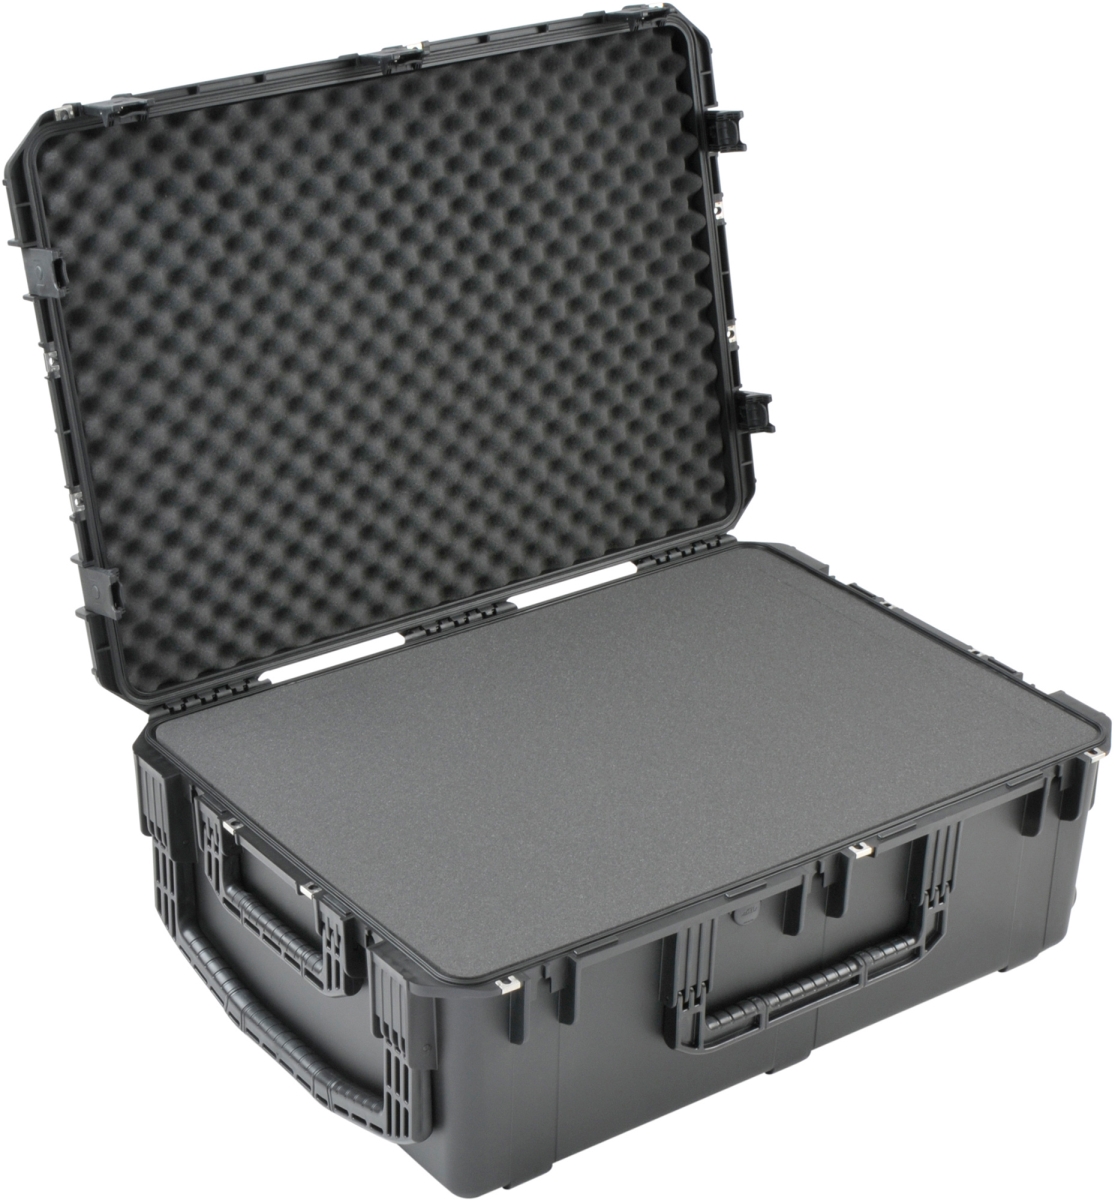 Picture of SKB 3I-3424-12BC 34 x 24 x 12 in. Waterproof Case with Cubed Foam & Wheels